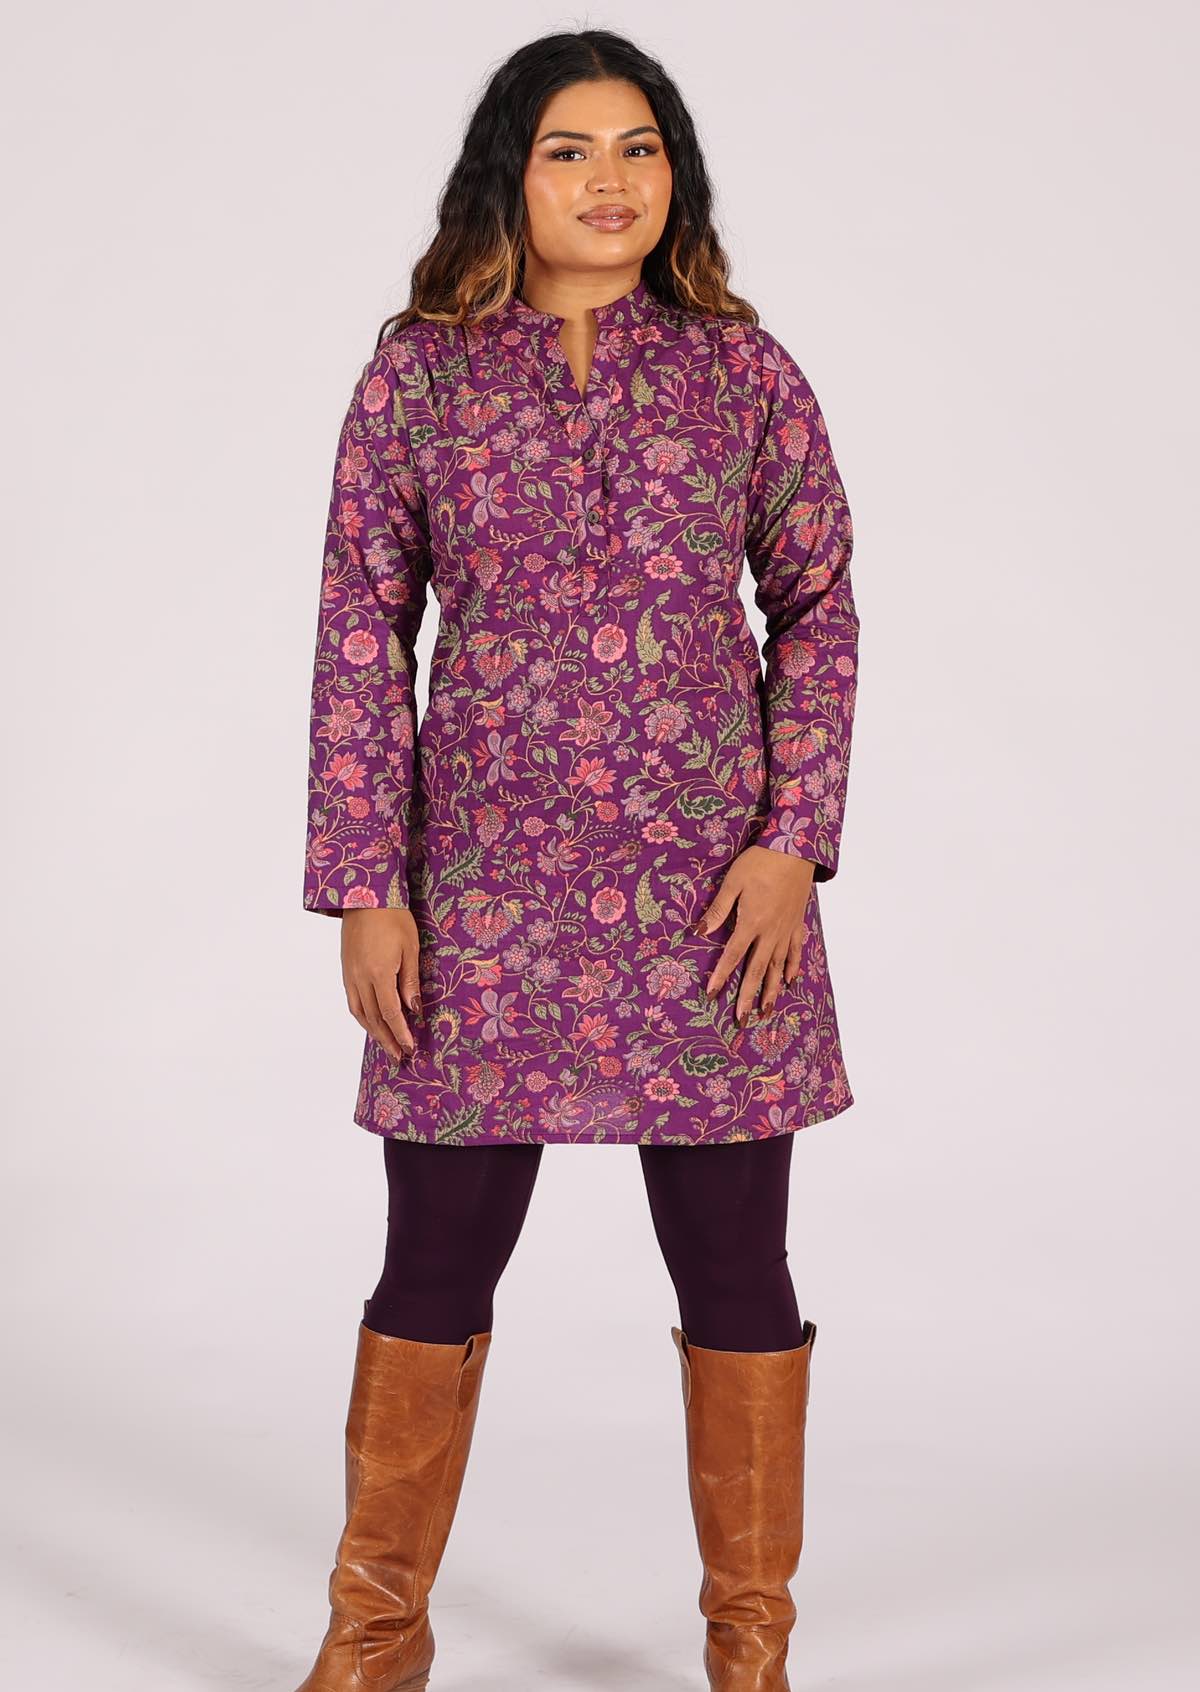 Long sleeve cotton shirt dress, wear it over leggings or pants, or by itself on warm days